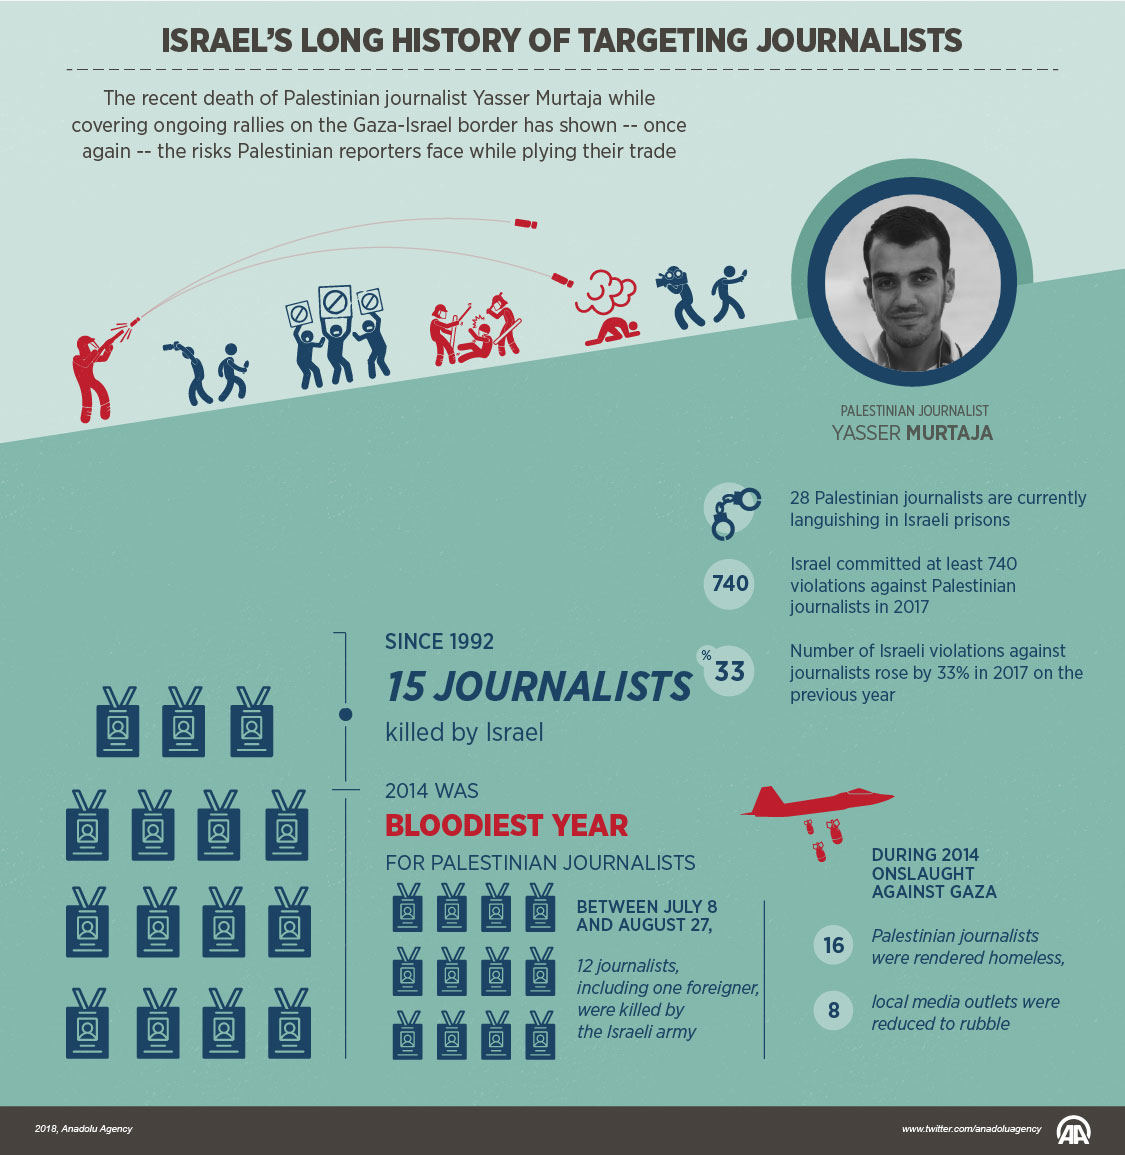 Israel’s long history of targeting journalists